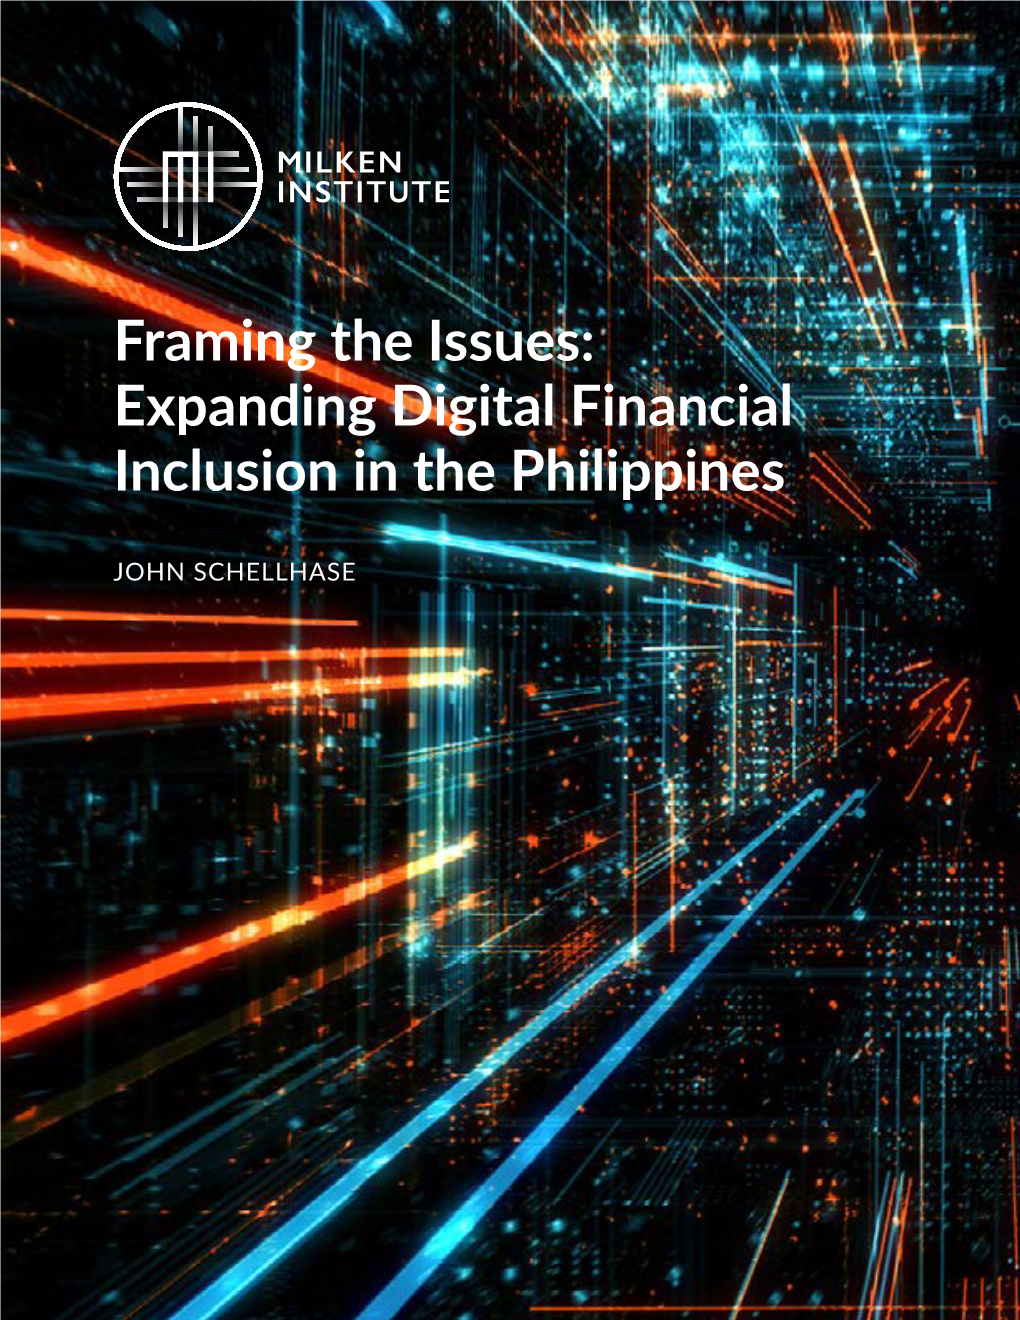 Framing the Issues: Expanding Digital Financial Inclusion in the Philippines